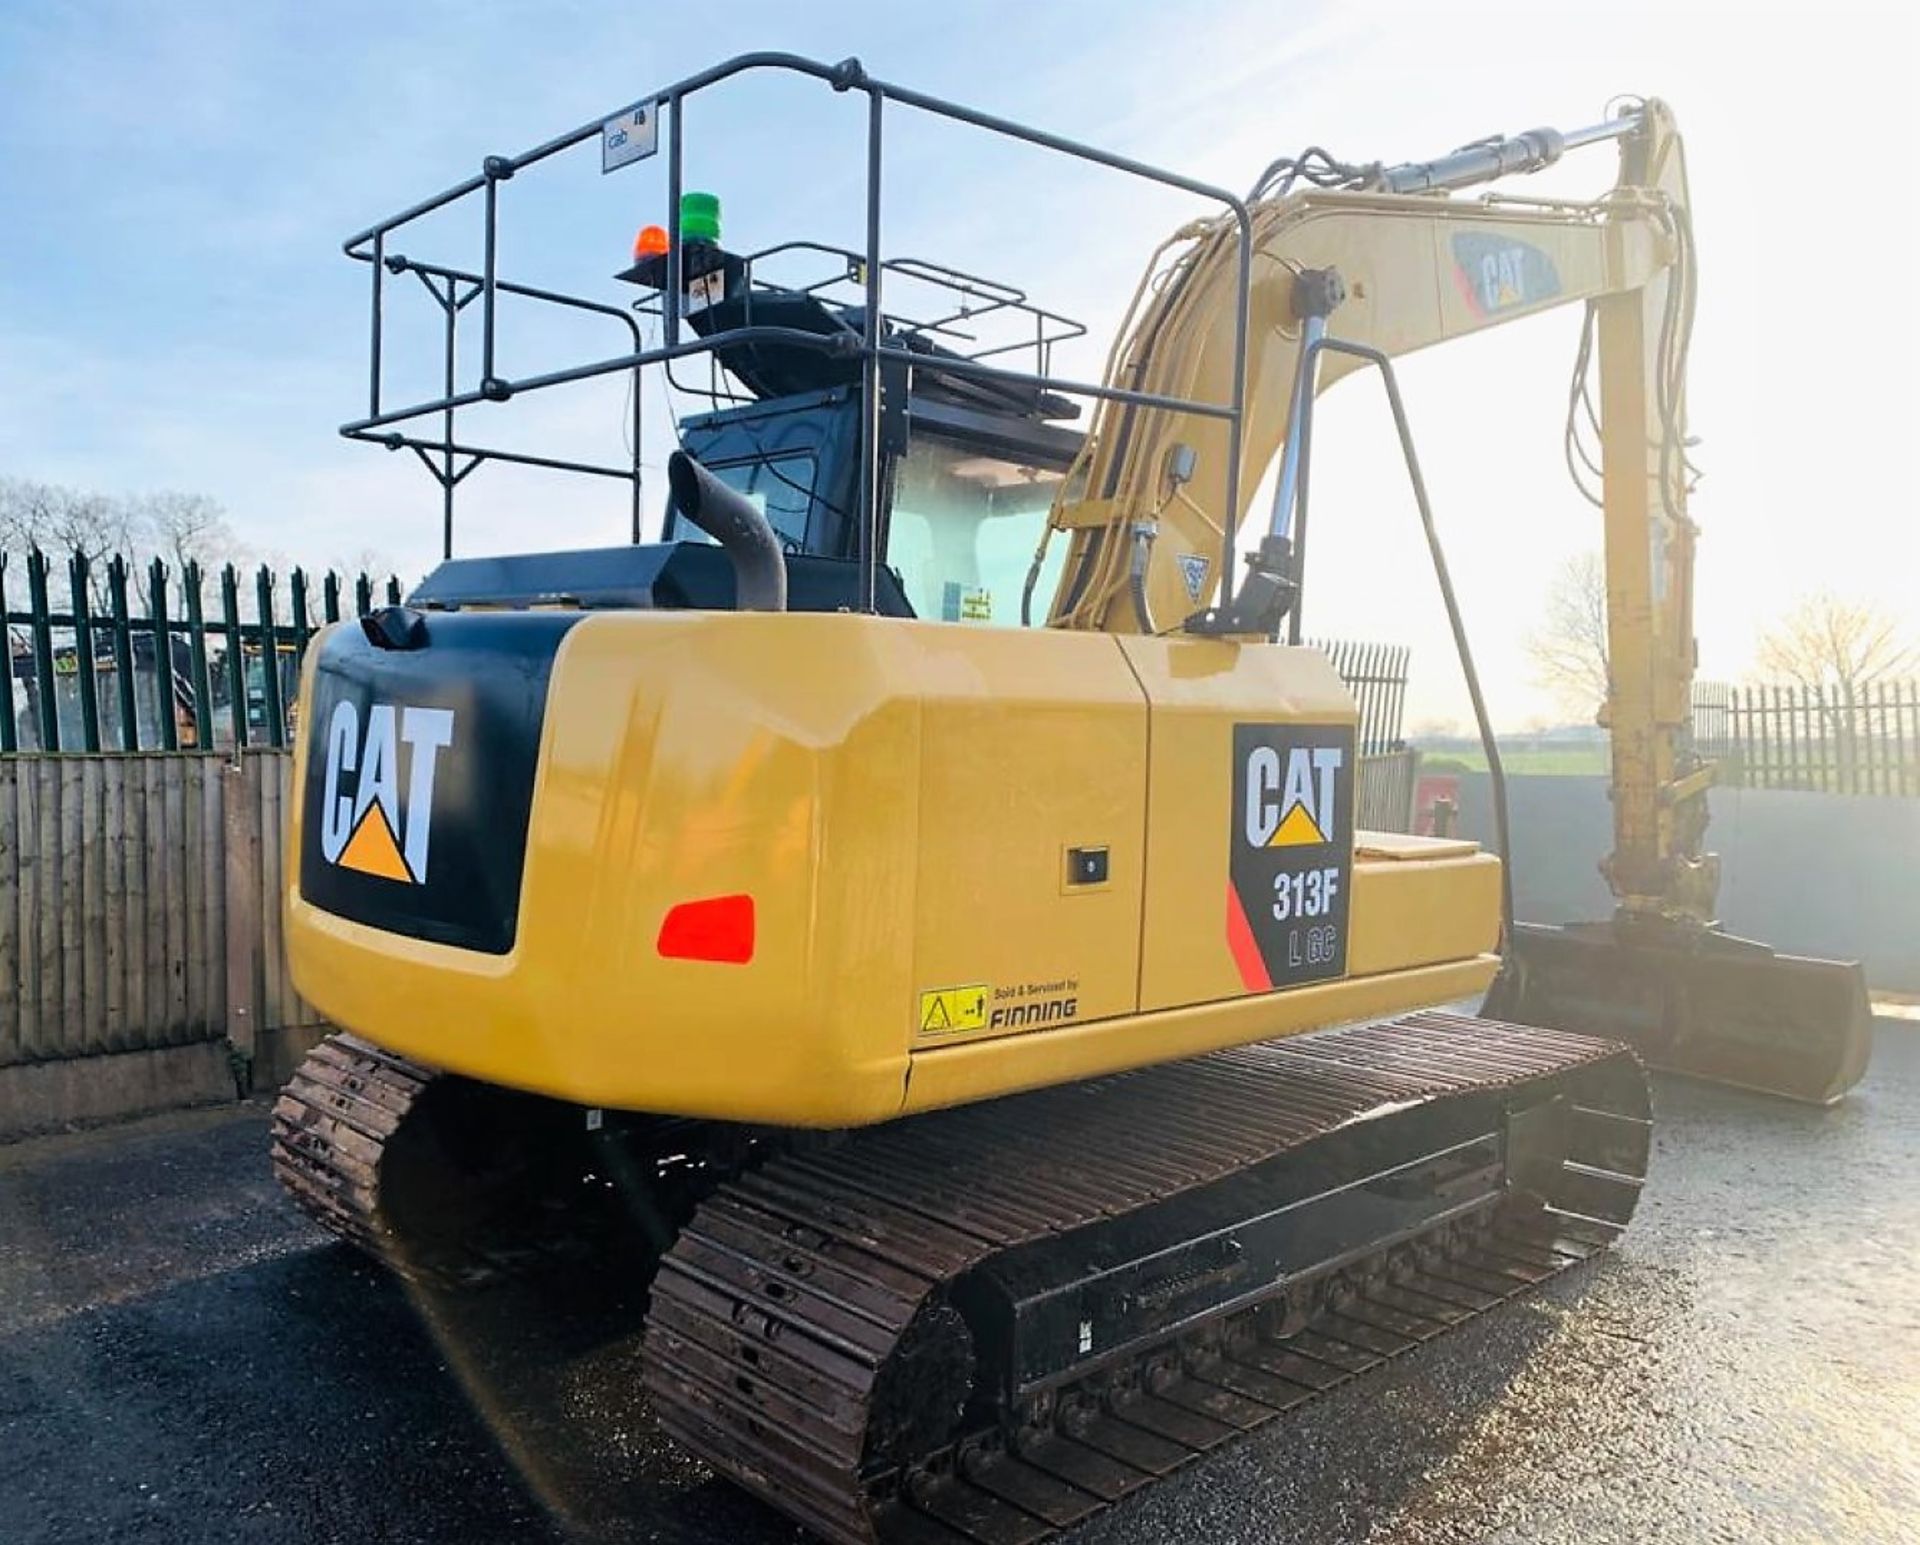 CAT 313 F LGC STEEL TRACKED CRAWLER DIGGER / EXCAVATOR, YEAR 2016, 3445 HOURS, 2 X BUCKETS, AIR CON - Image 4 of 19